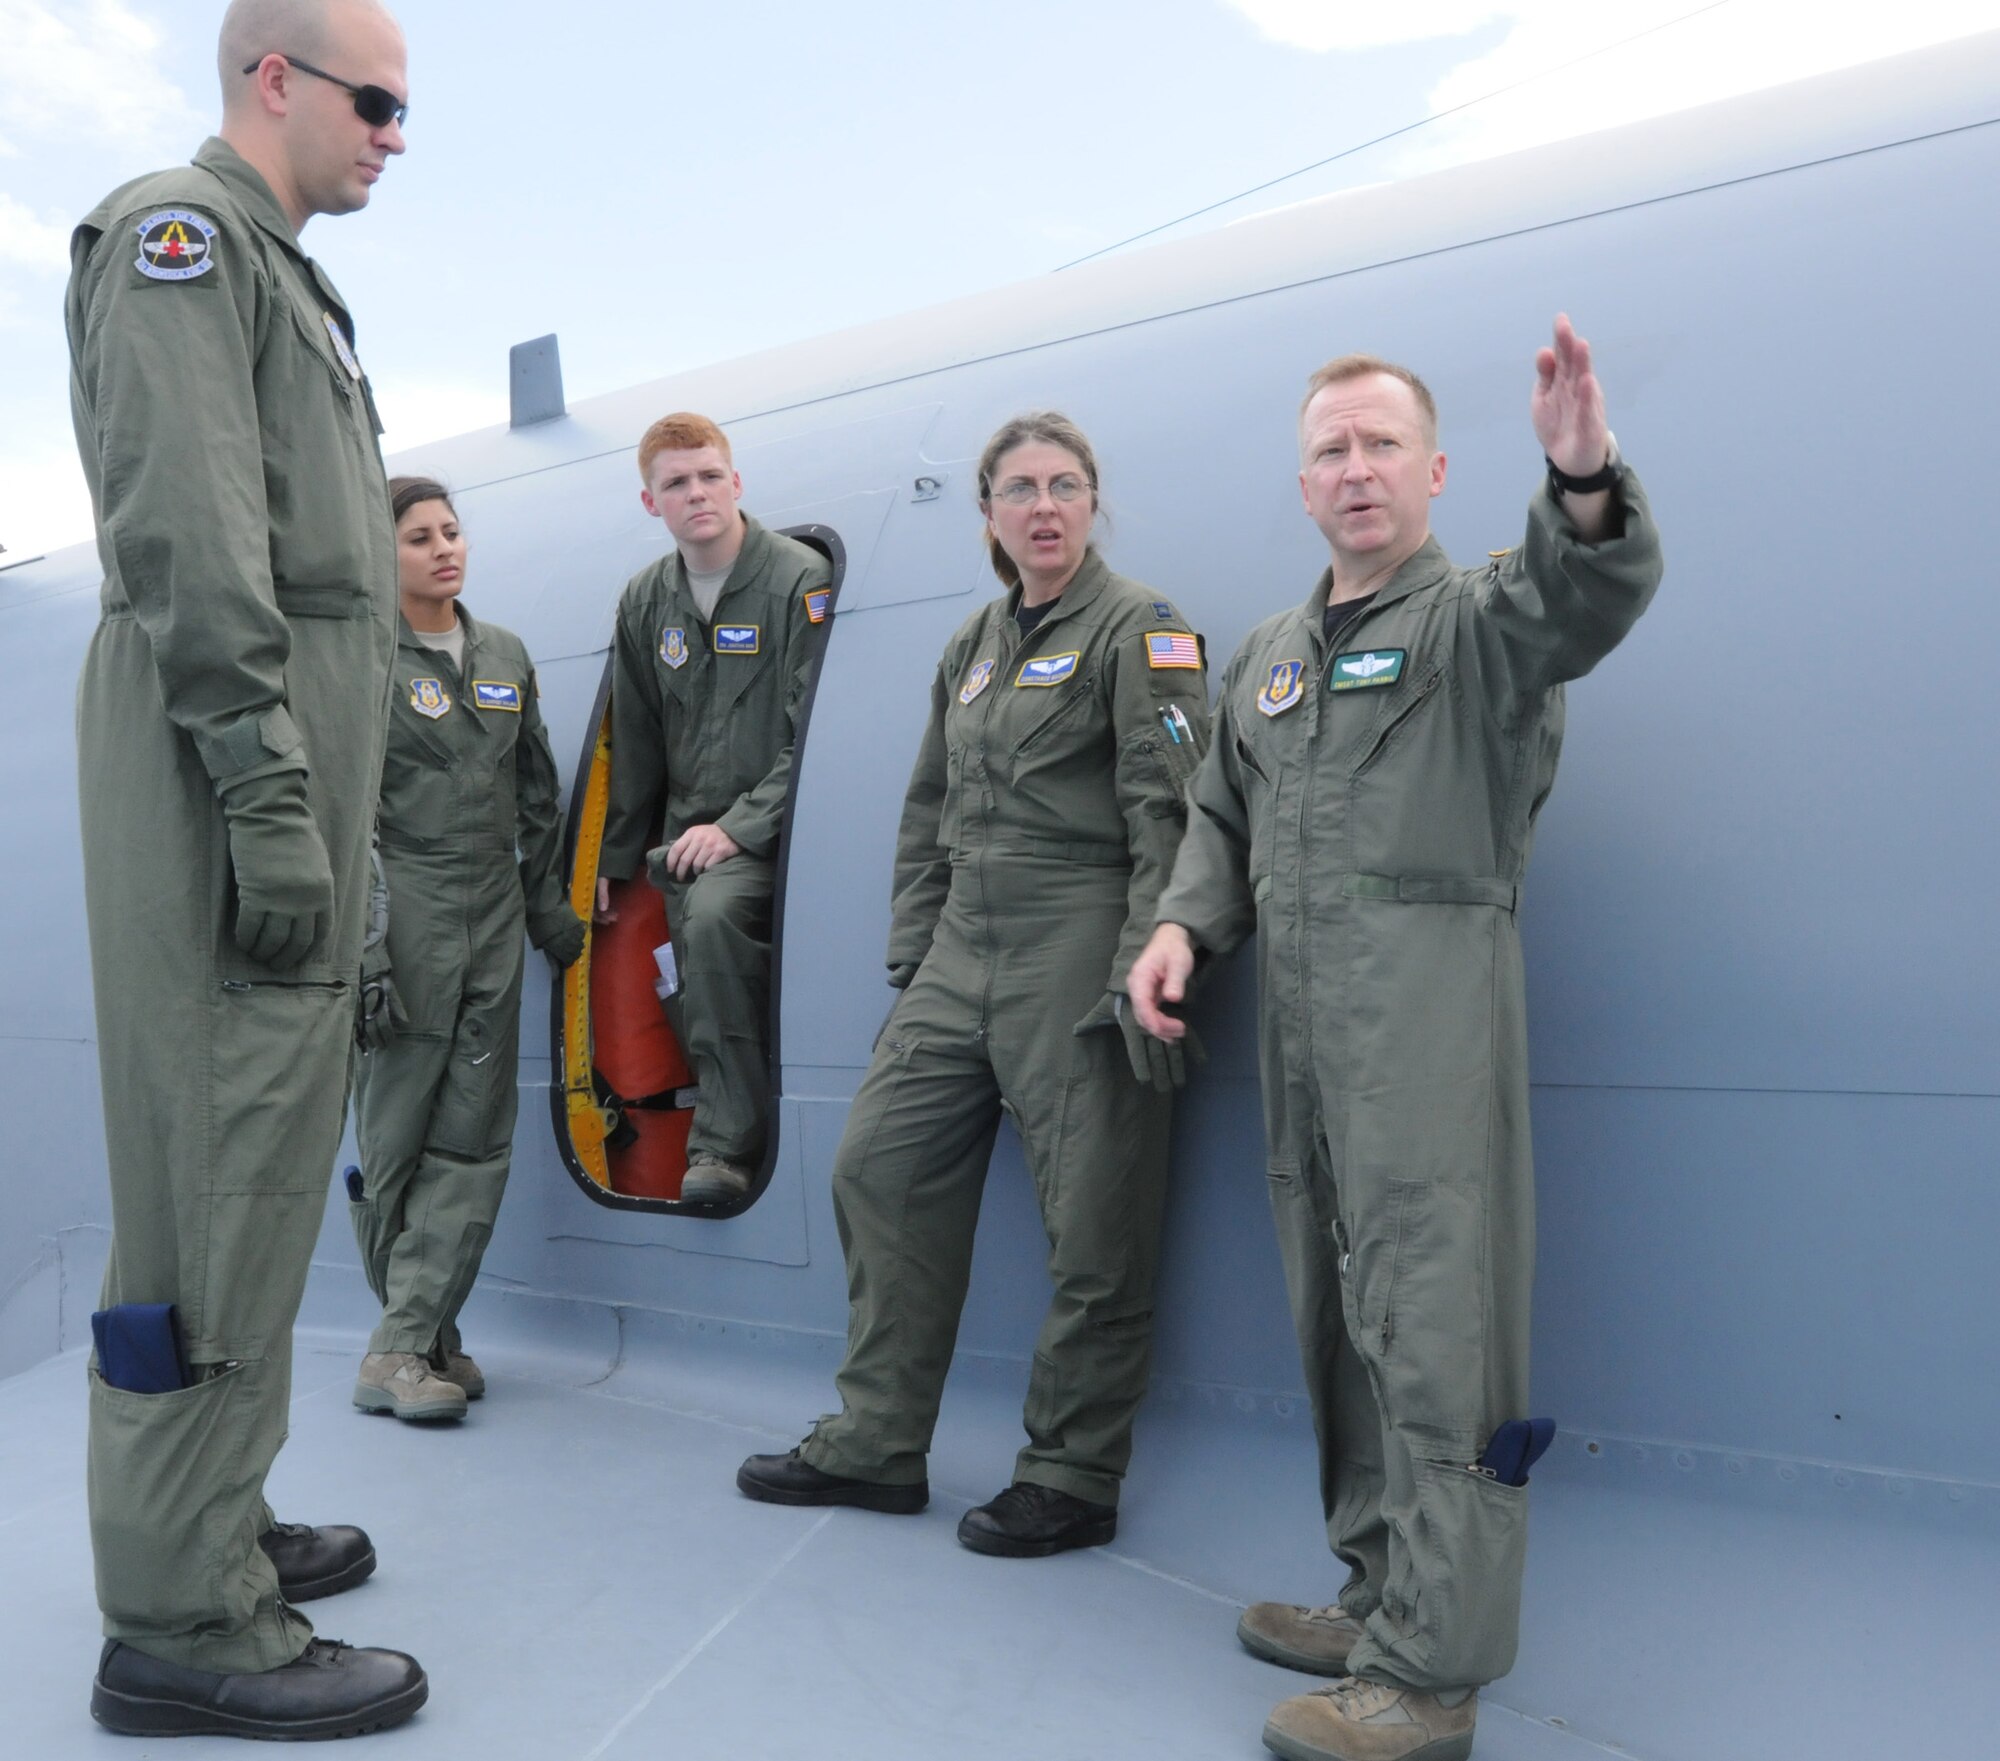 Chief Master Sgt. Tony Parris, 77 Air Refueling Squadron boom operator, shows Airmen from the 36th Aeromedical Evacuation Squadron and the 43rd AES how to safely exit a KC-135R Stratotanker in the event of an emergency landing here June 26. Members from the 459th AES, 36th AES and the 43rd AES participated in a three-day Total Force aeromedical evacuation training mission in Melbourne, Fl. (U.S. Air Force photo/Staff Sgt. Steve Lewis)